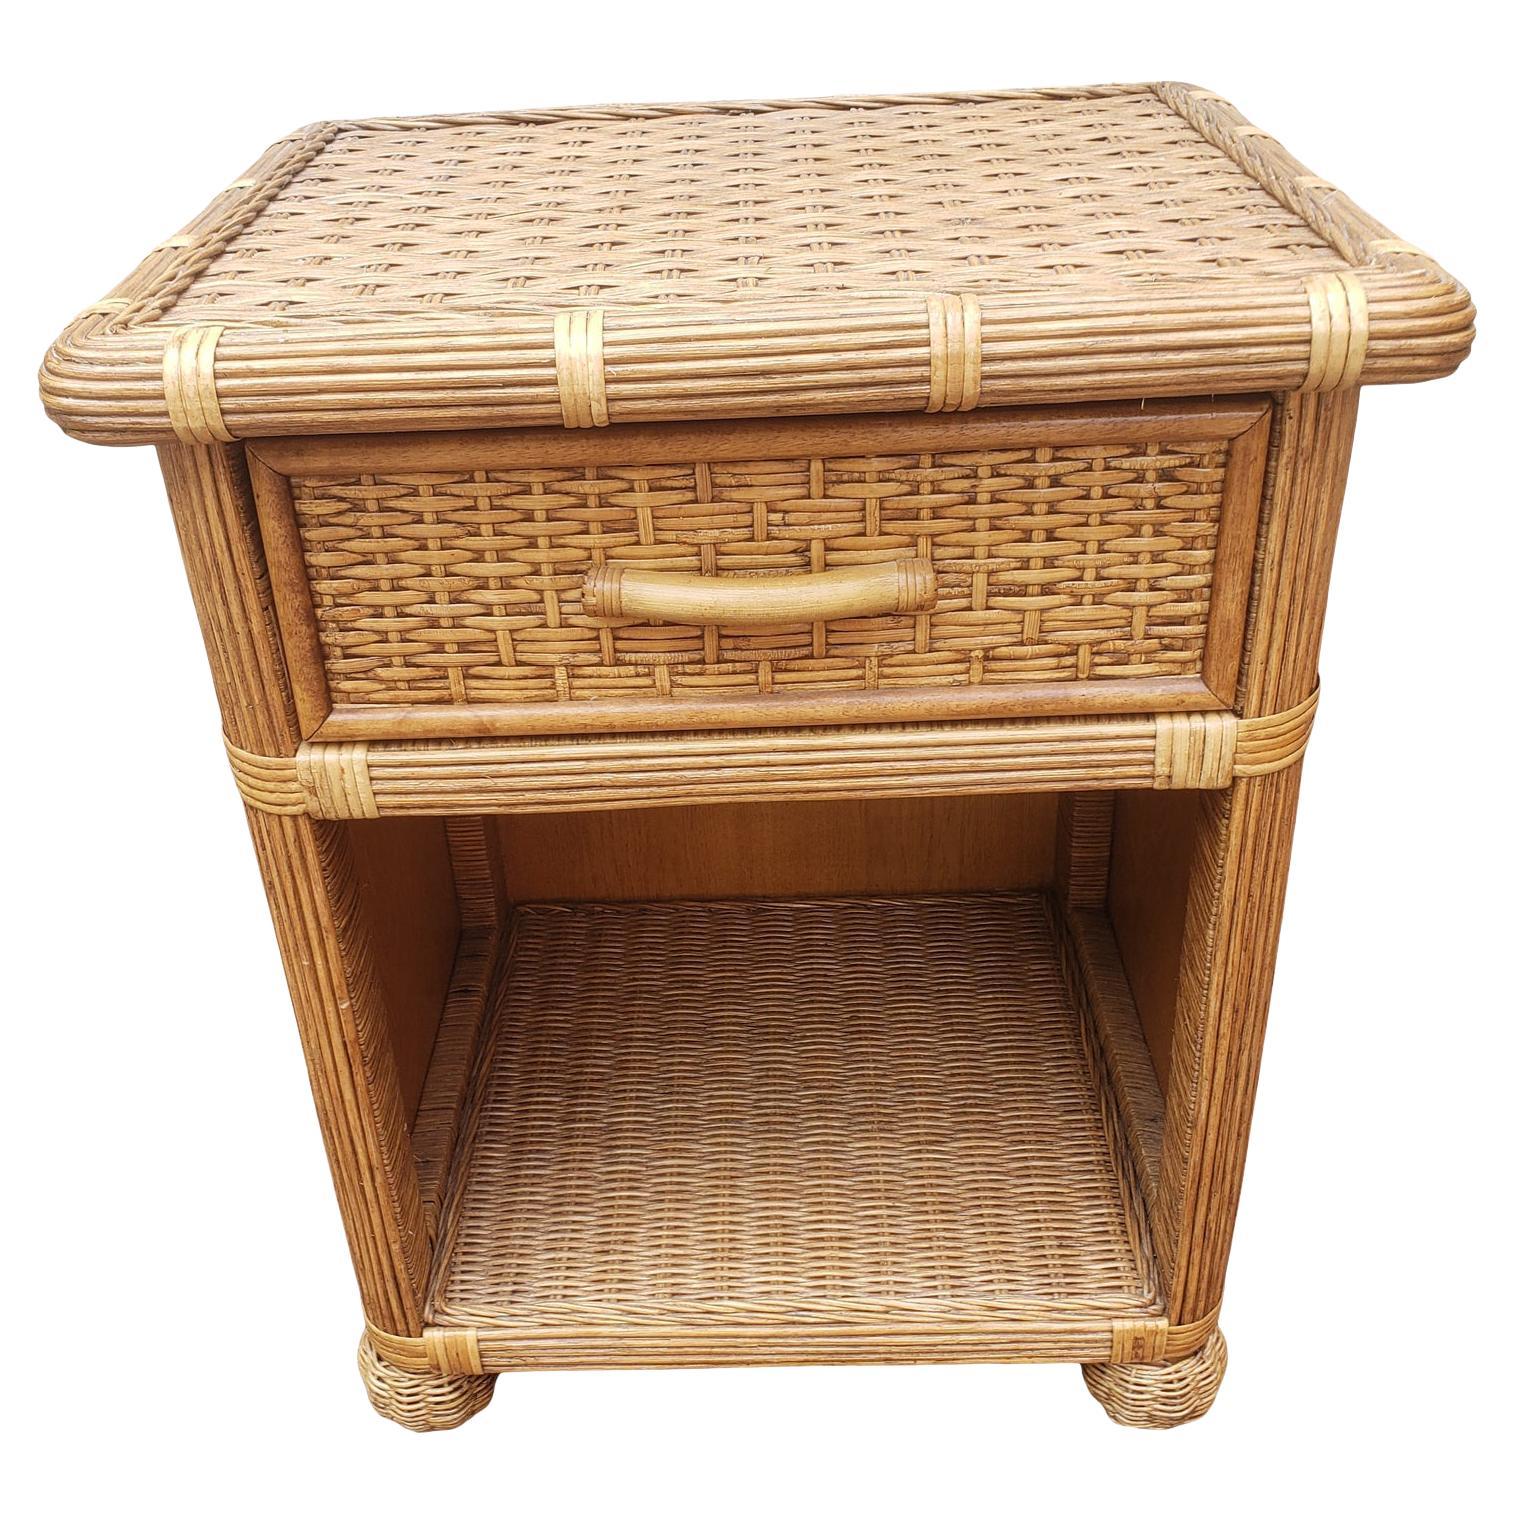 1970s Rattan Wicker Nightstand with Drawer